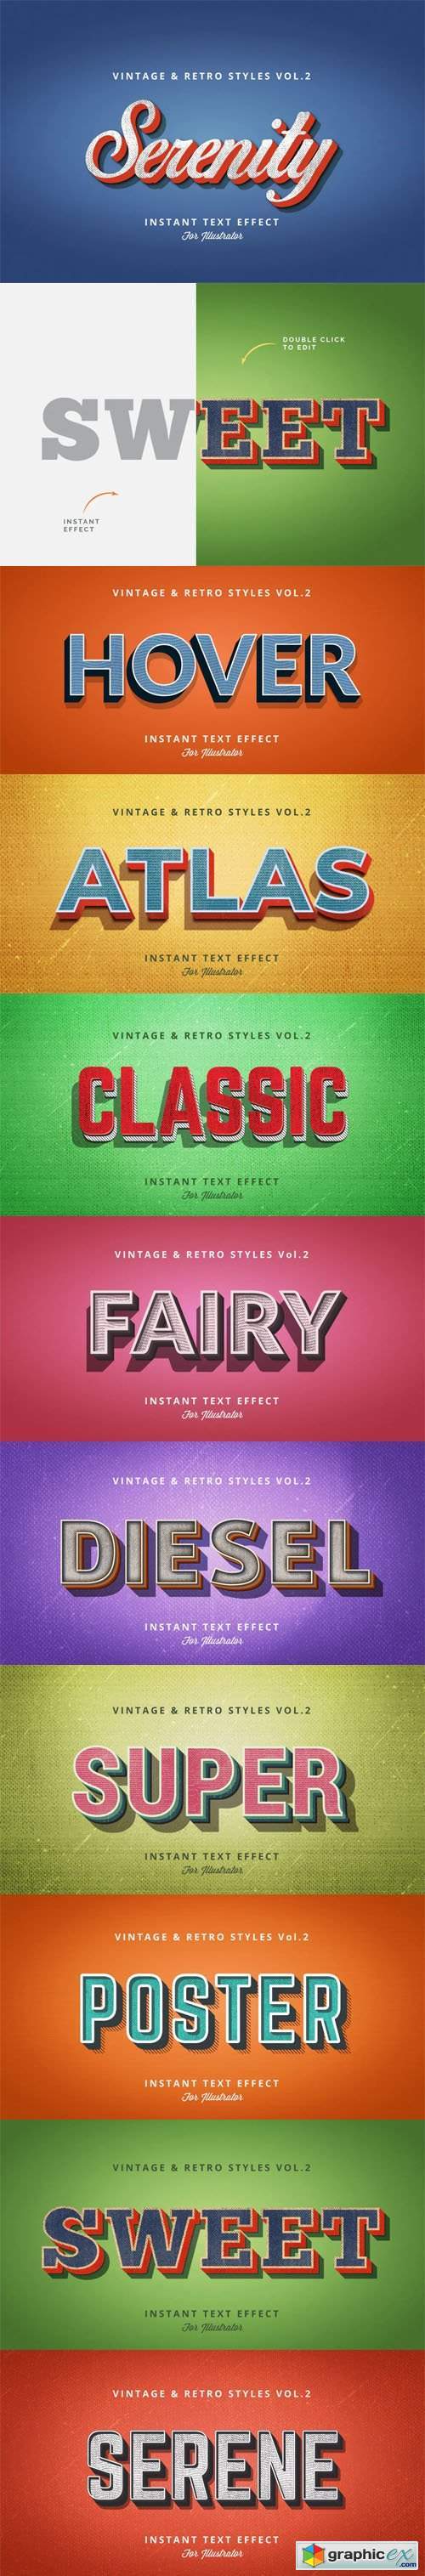 Vintage and Retro Graphic Styles Vol.2 for Adobe Illustrator